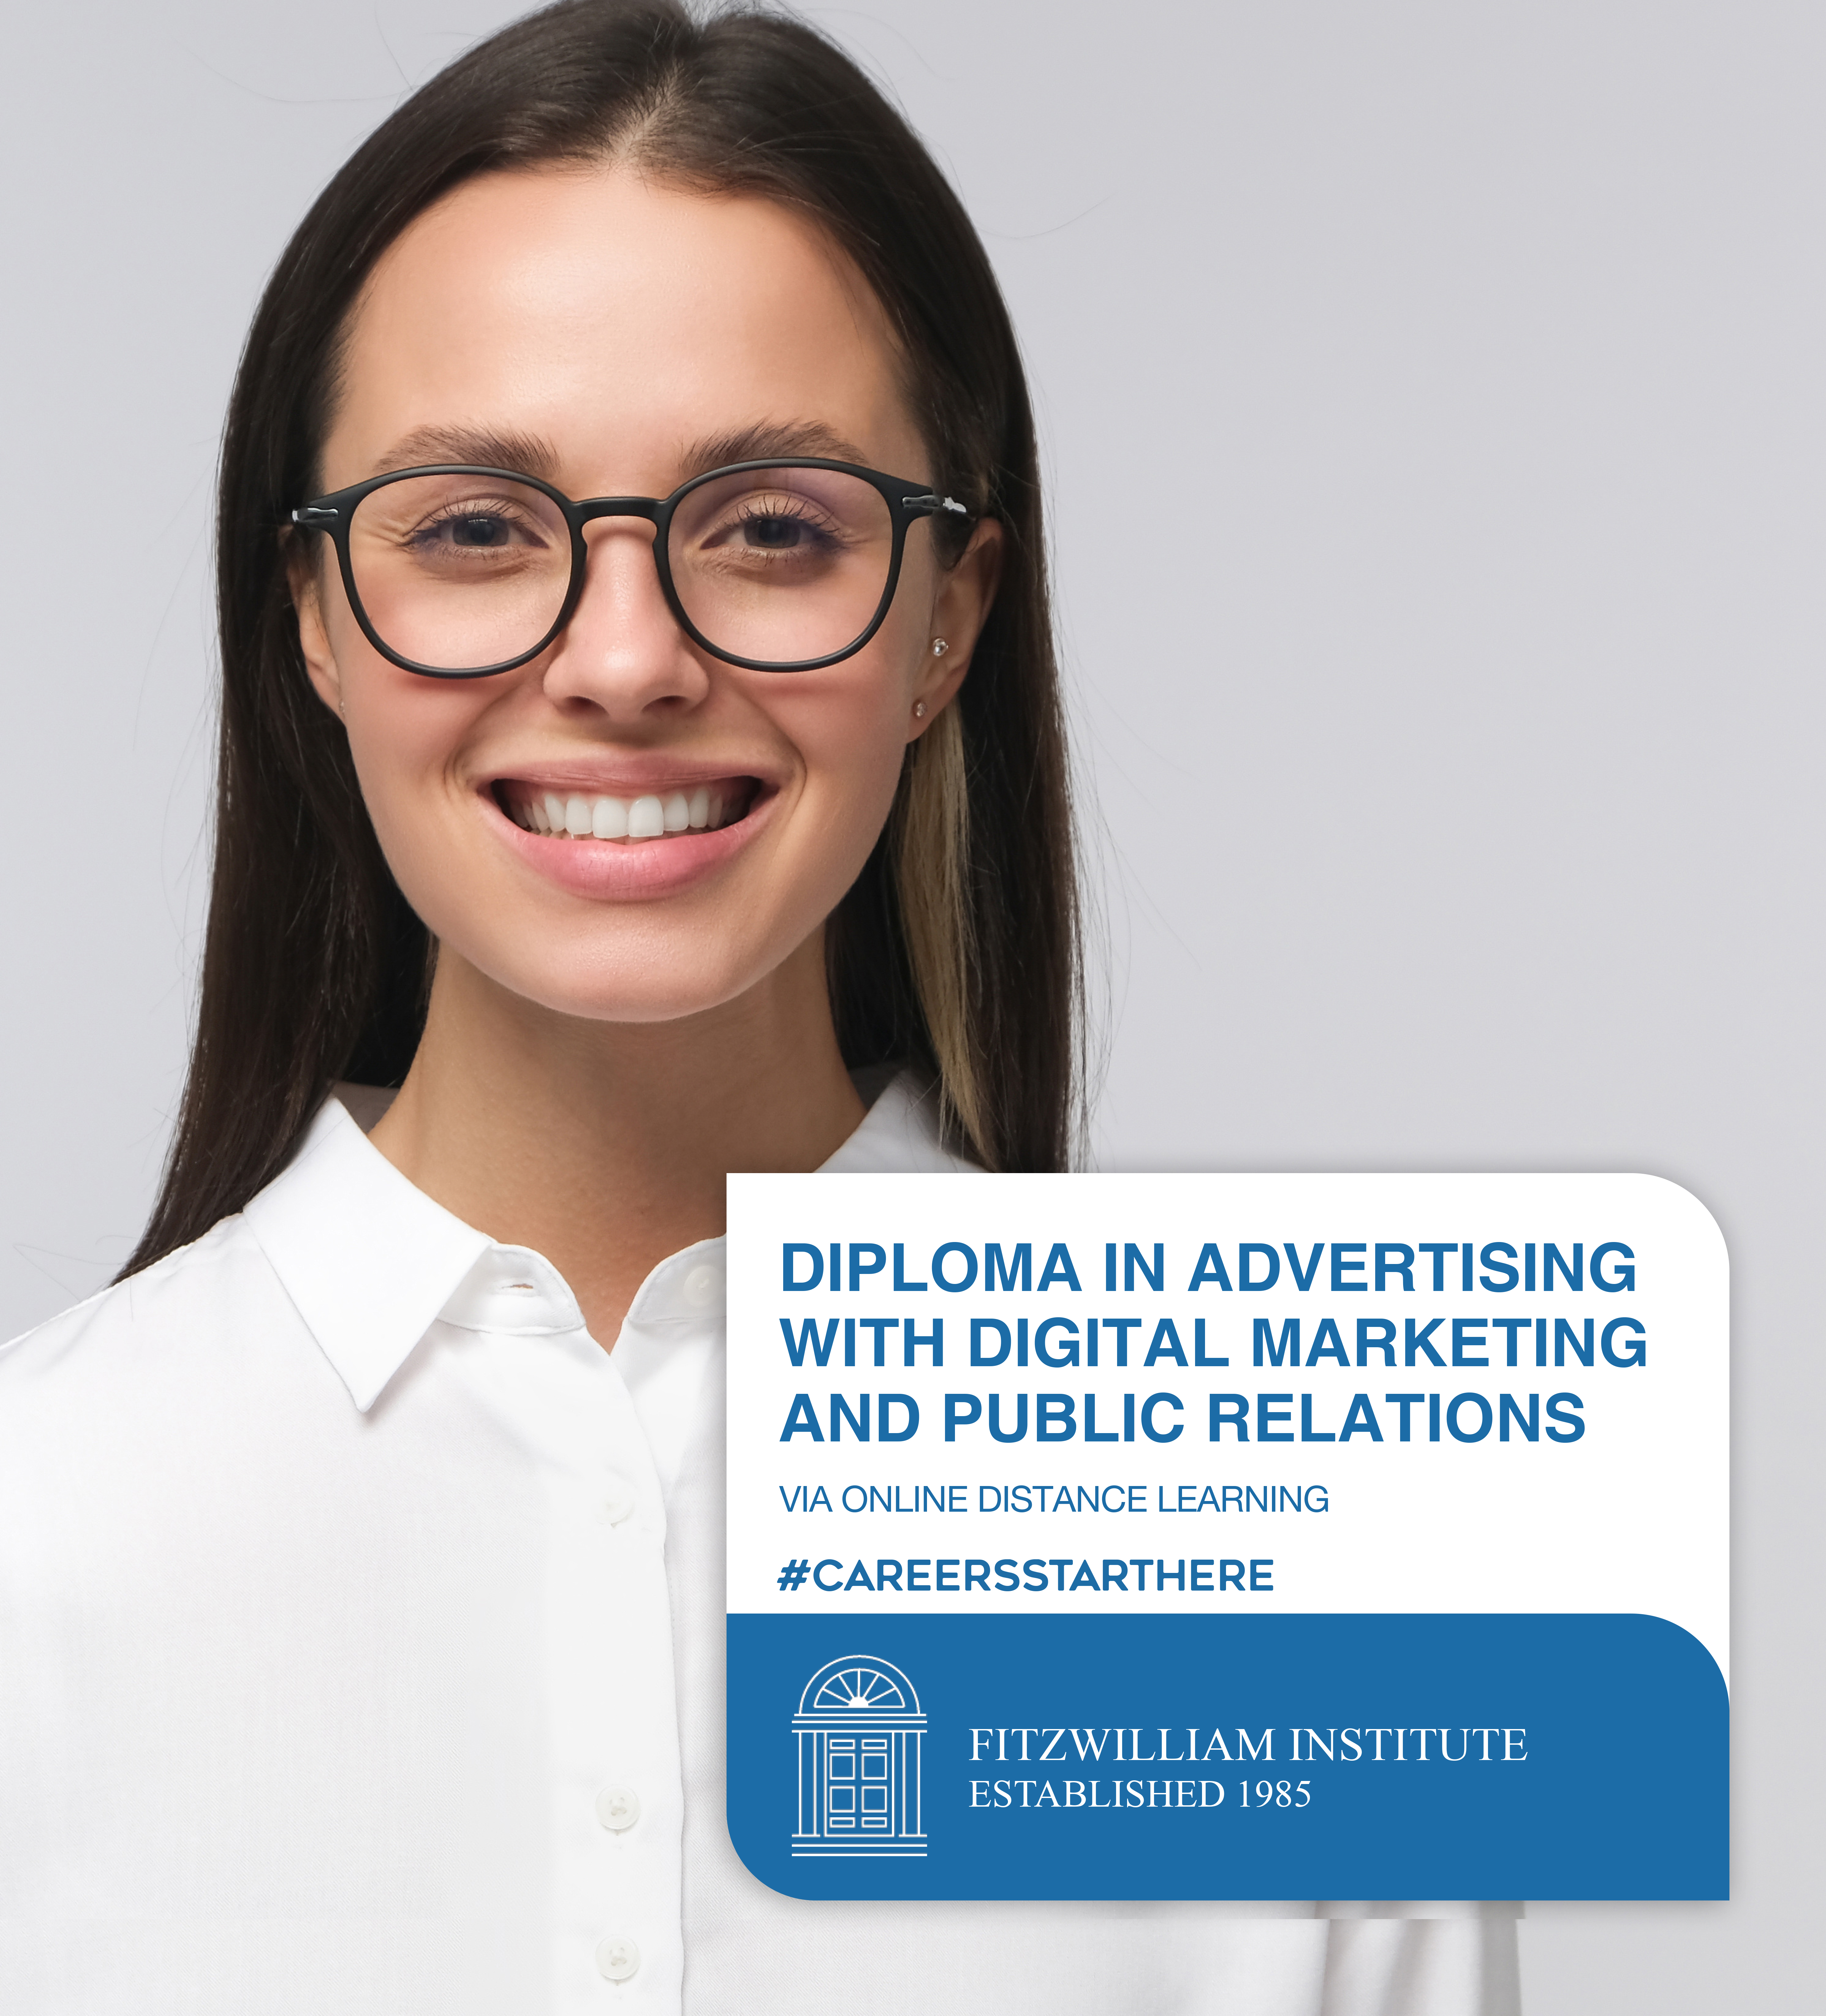 DIPLOMA-IN-ADVERTISING-WITH-DIGITAL-MARKETING-PUBLIC-RELATIONS-VIA-ONLINE-DISTANCE-LEARNING.jpg